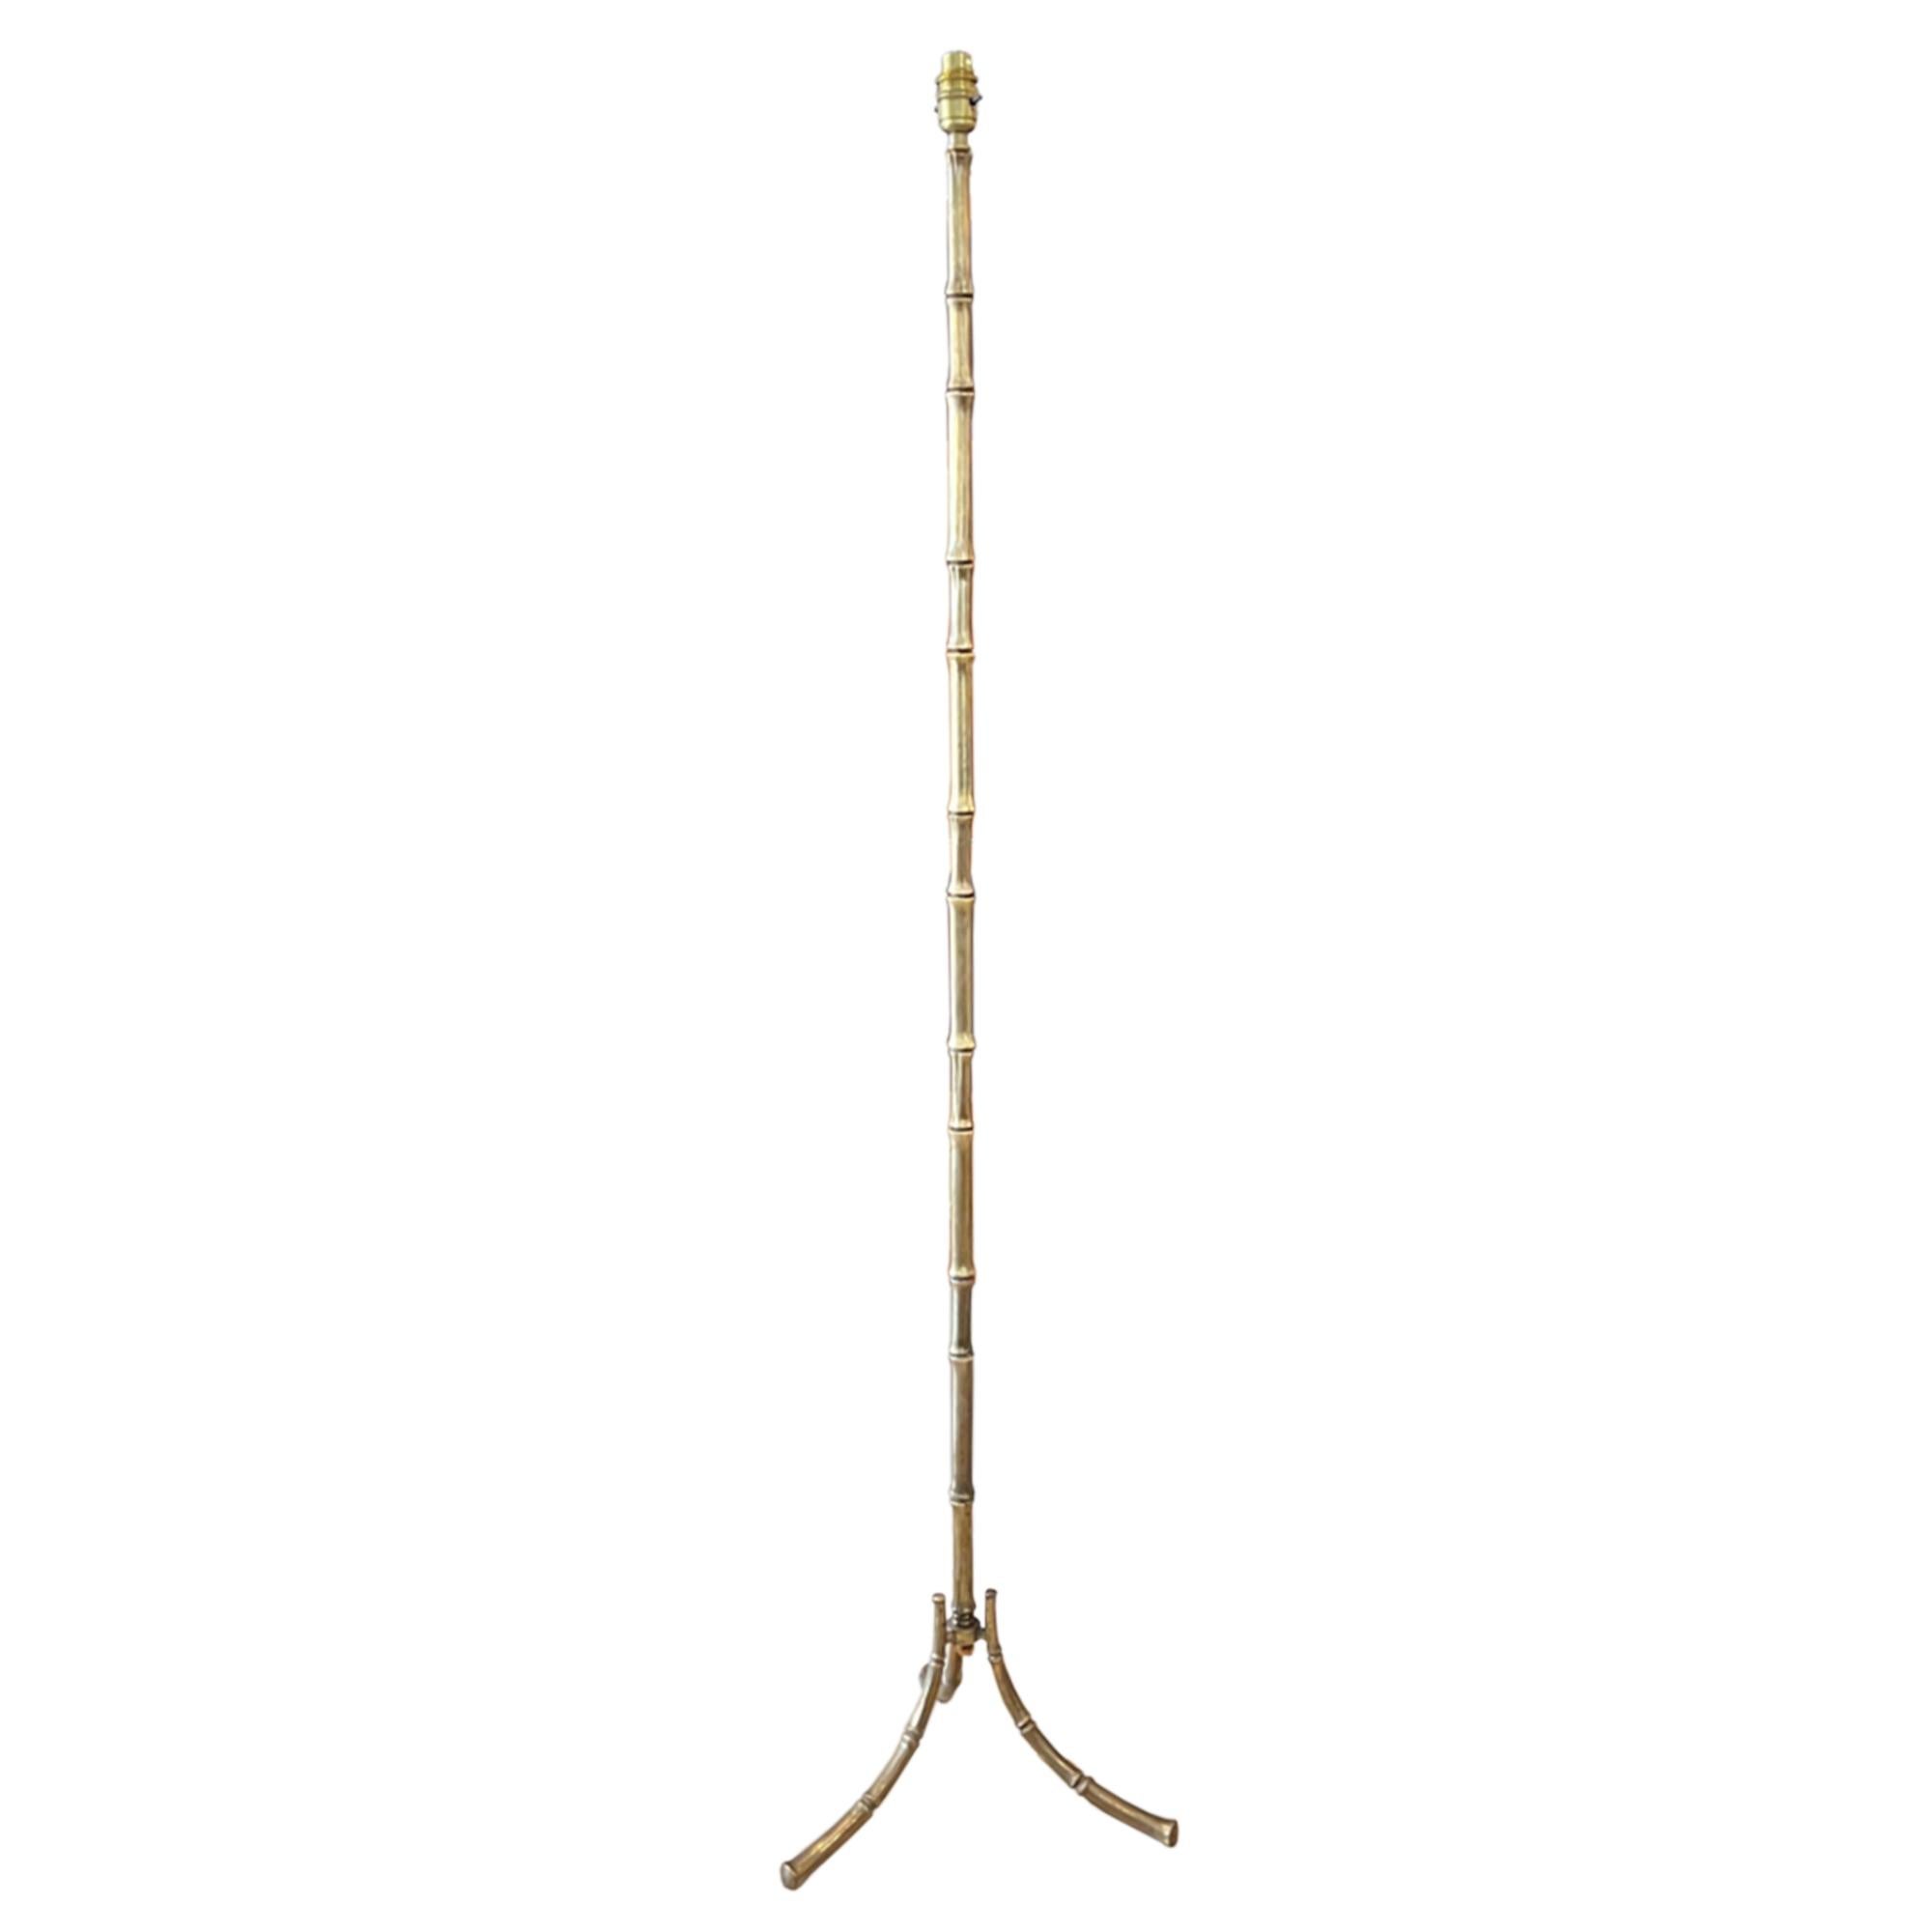 Beautiful and elegant, this floor lamp is brass and made in the Baguès style. Lovely faux bamboo detail - a classic 1960s design.

The base is triform with a 31cm width. The height of 142cm is to the top of the fitting.

This lamp is rewired with a